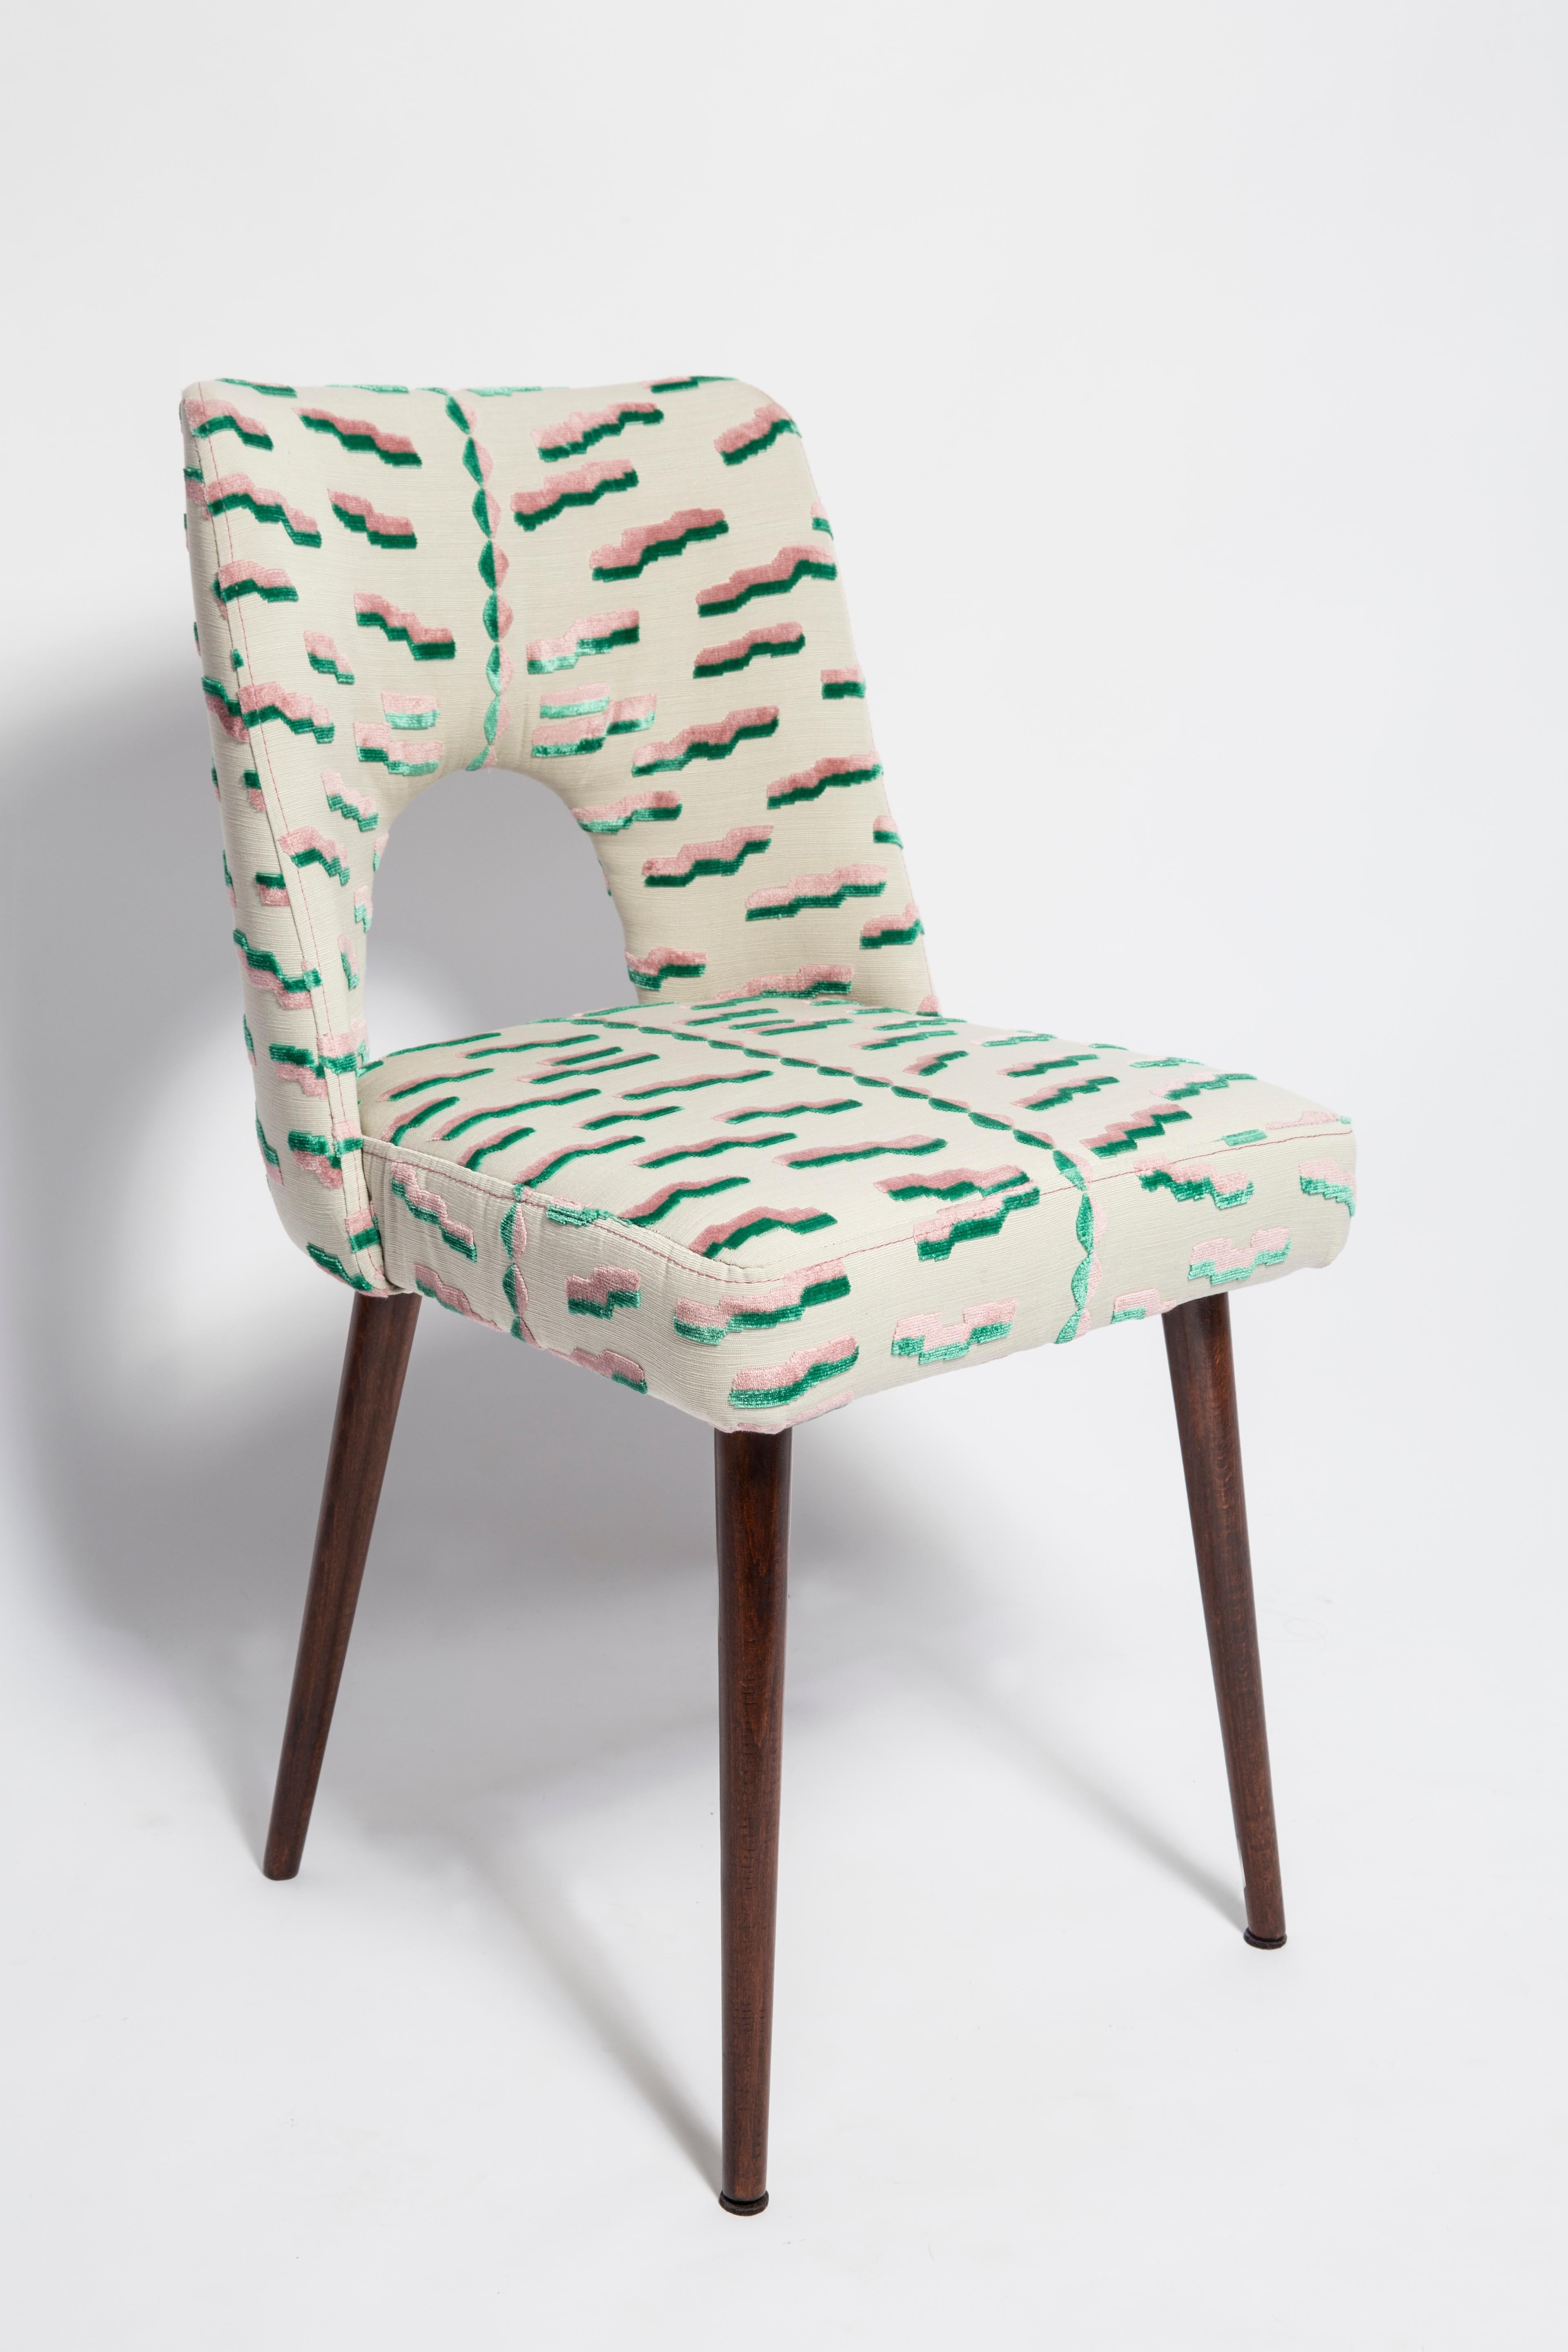 Beautiful chair type 1020 colloquially called 